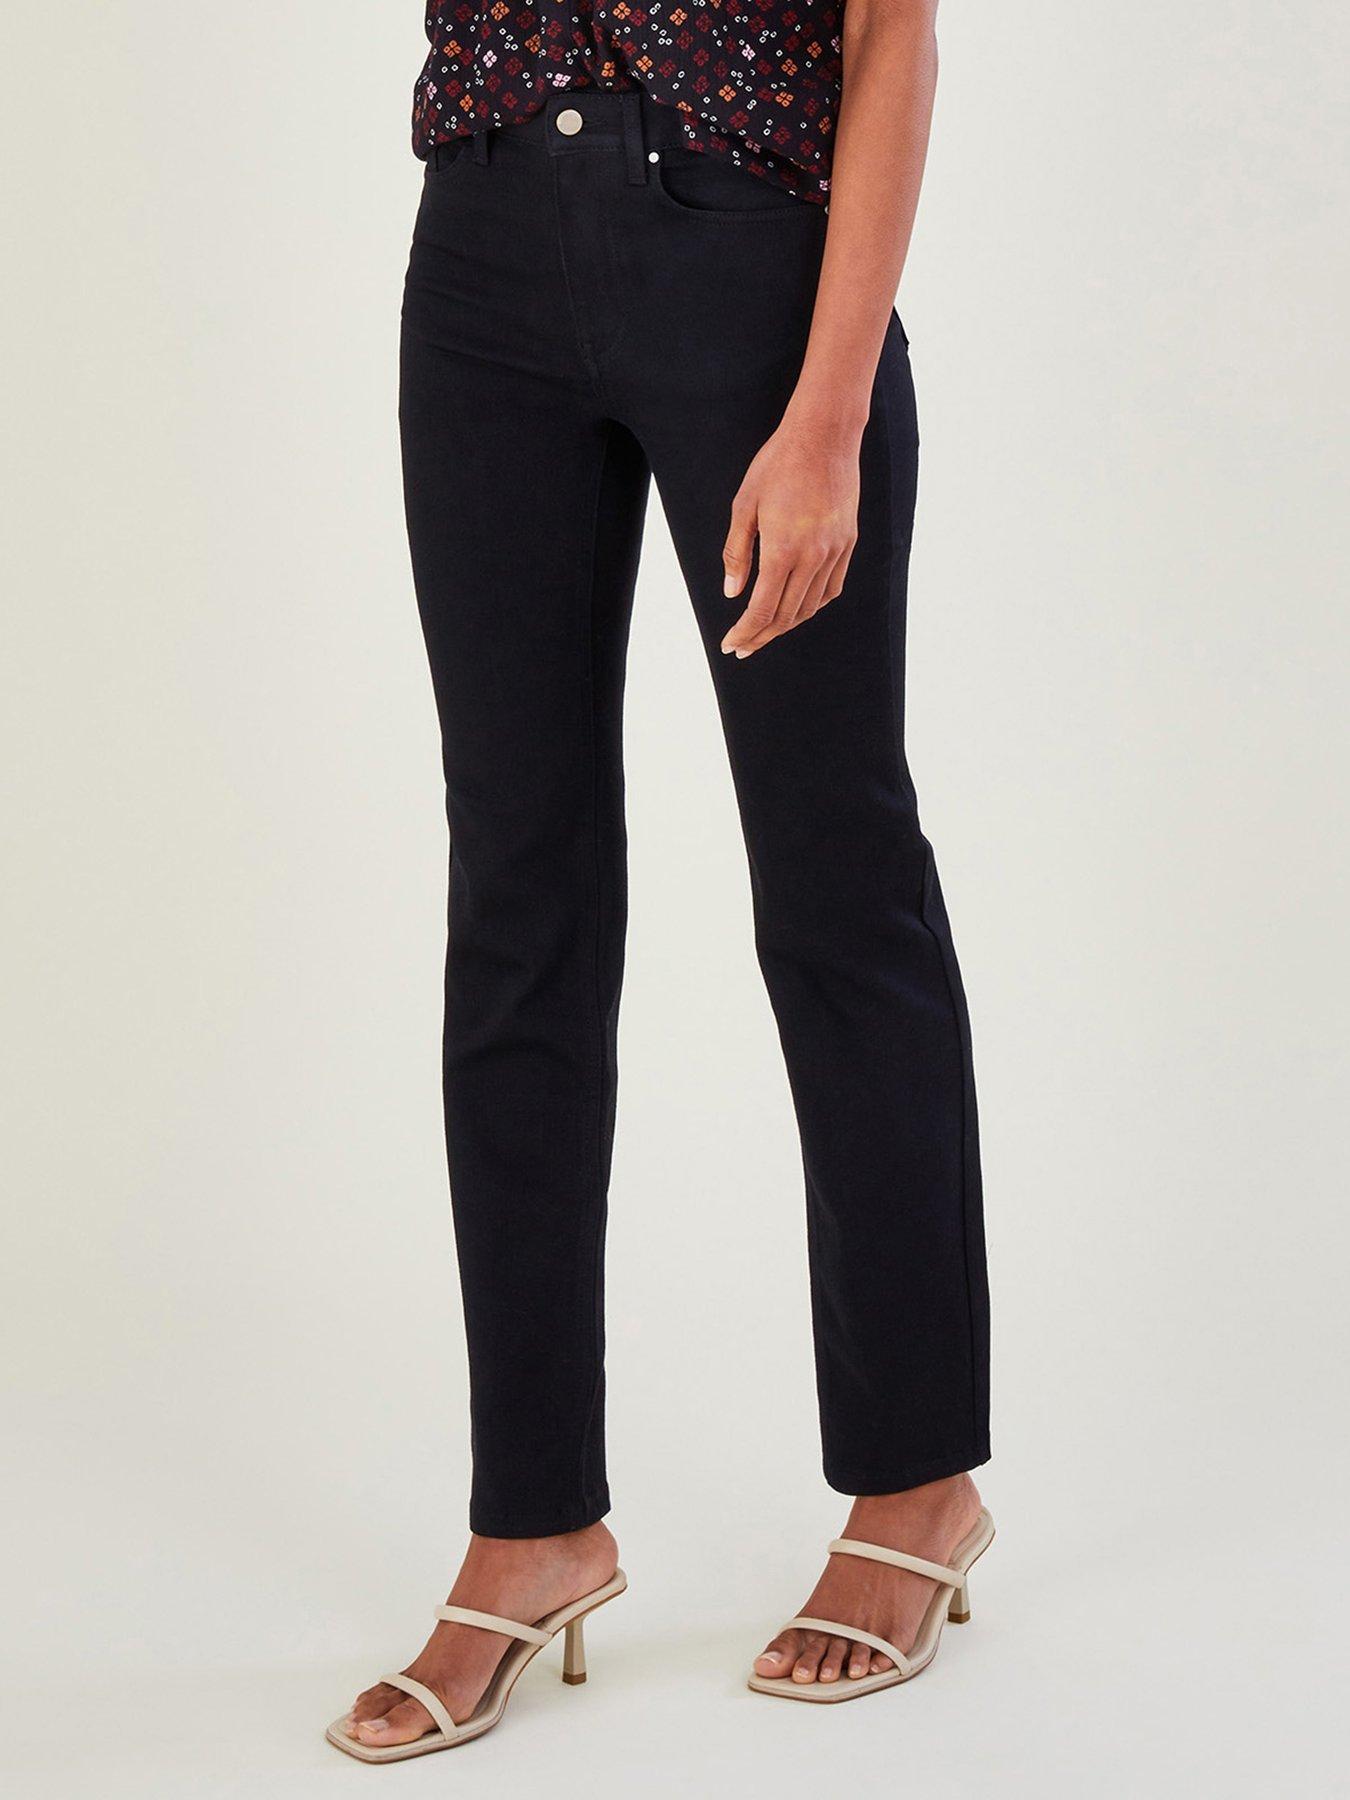 Classic Straight Fit Women's Jeans - Black